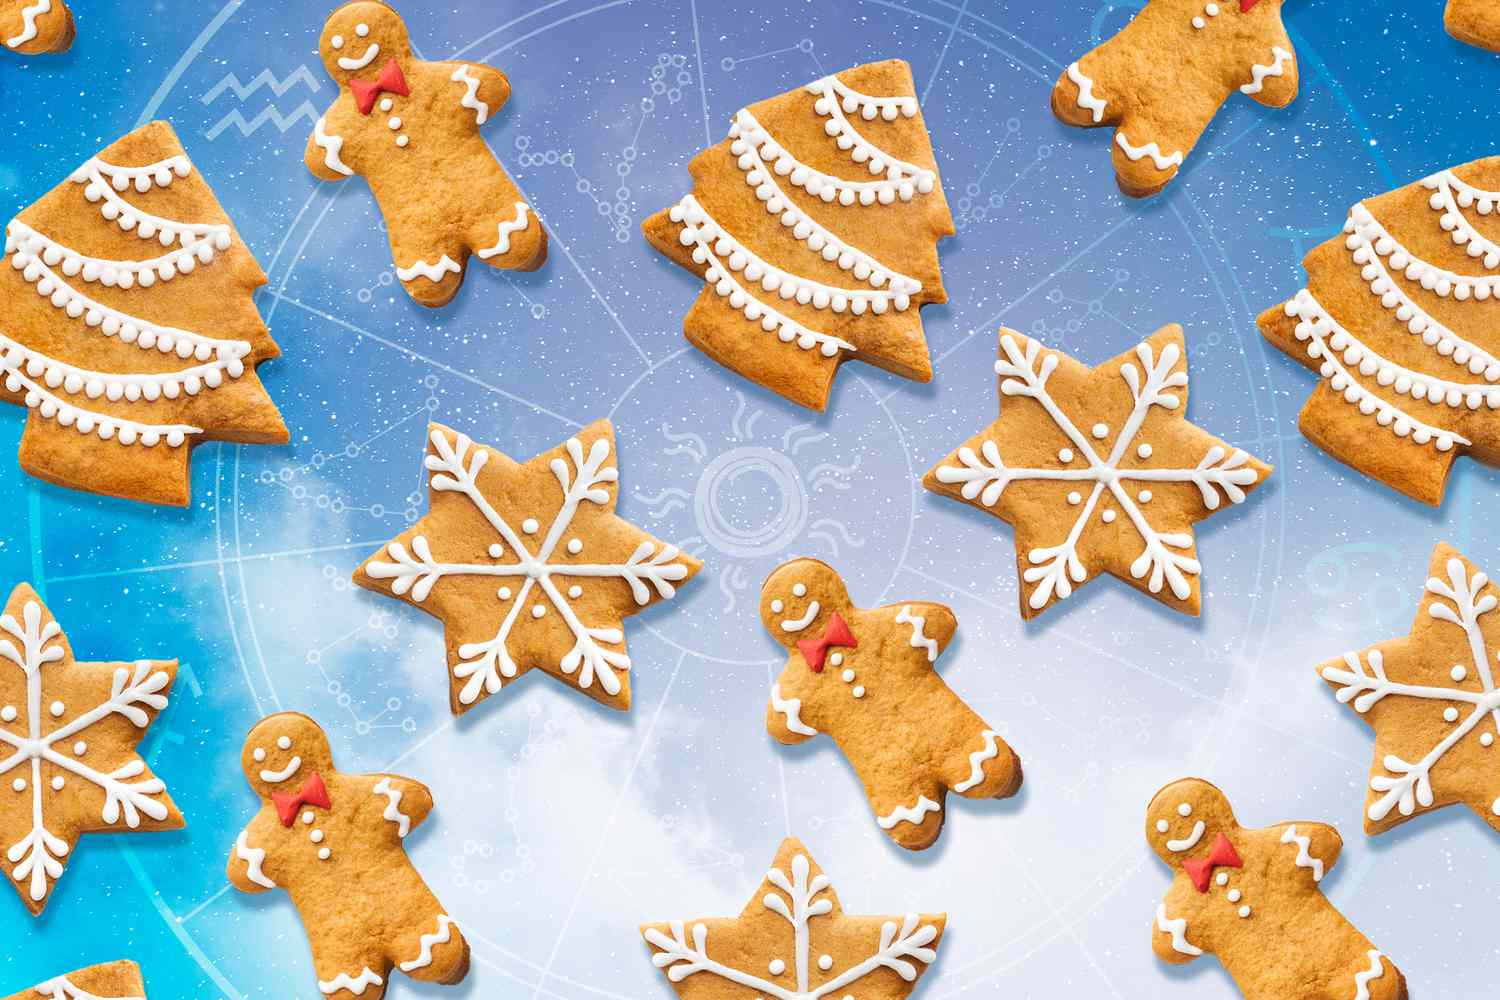 Holiday cookies floating on a space scape with a zodiac sign chart in the background